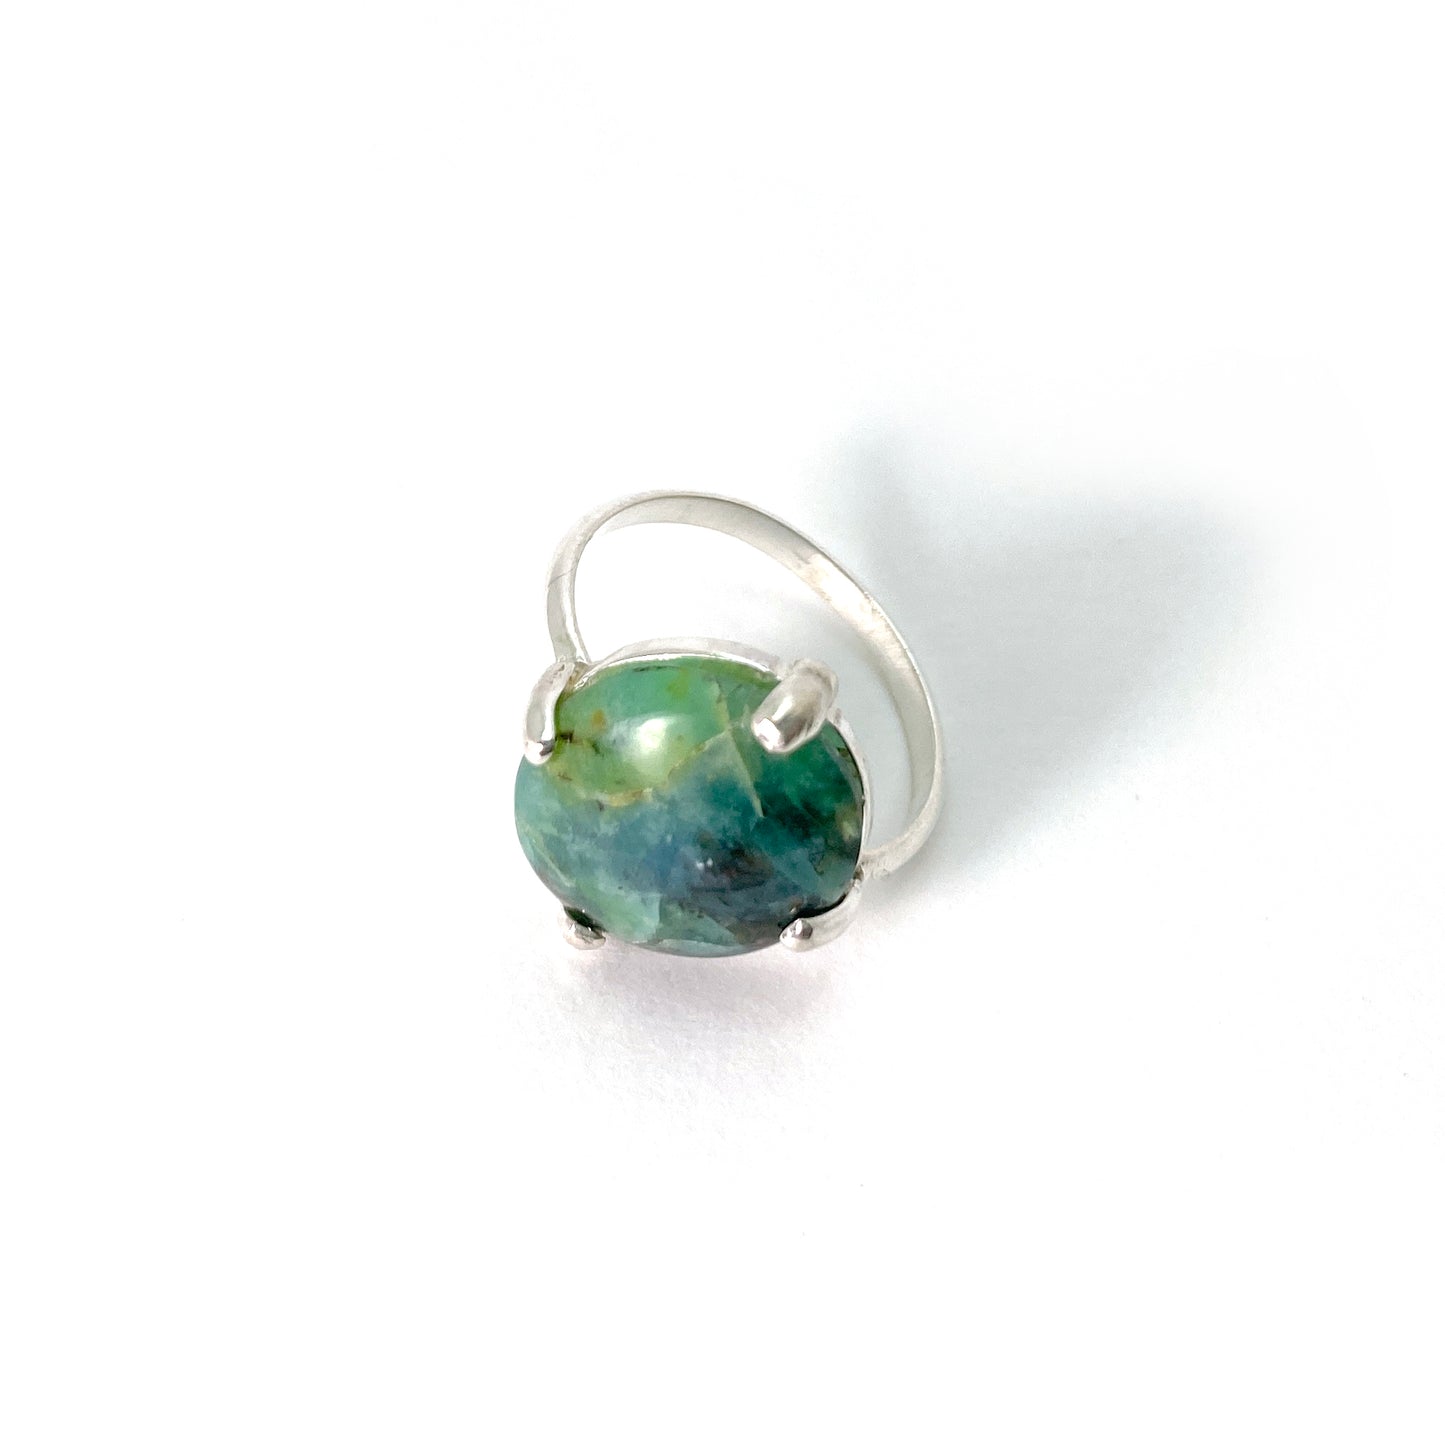 Opalized Wood and Sterling Silver Ring Size 6.5